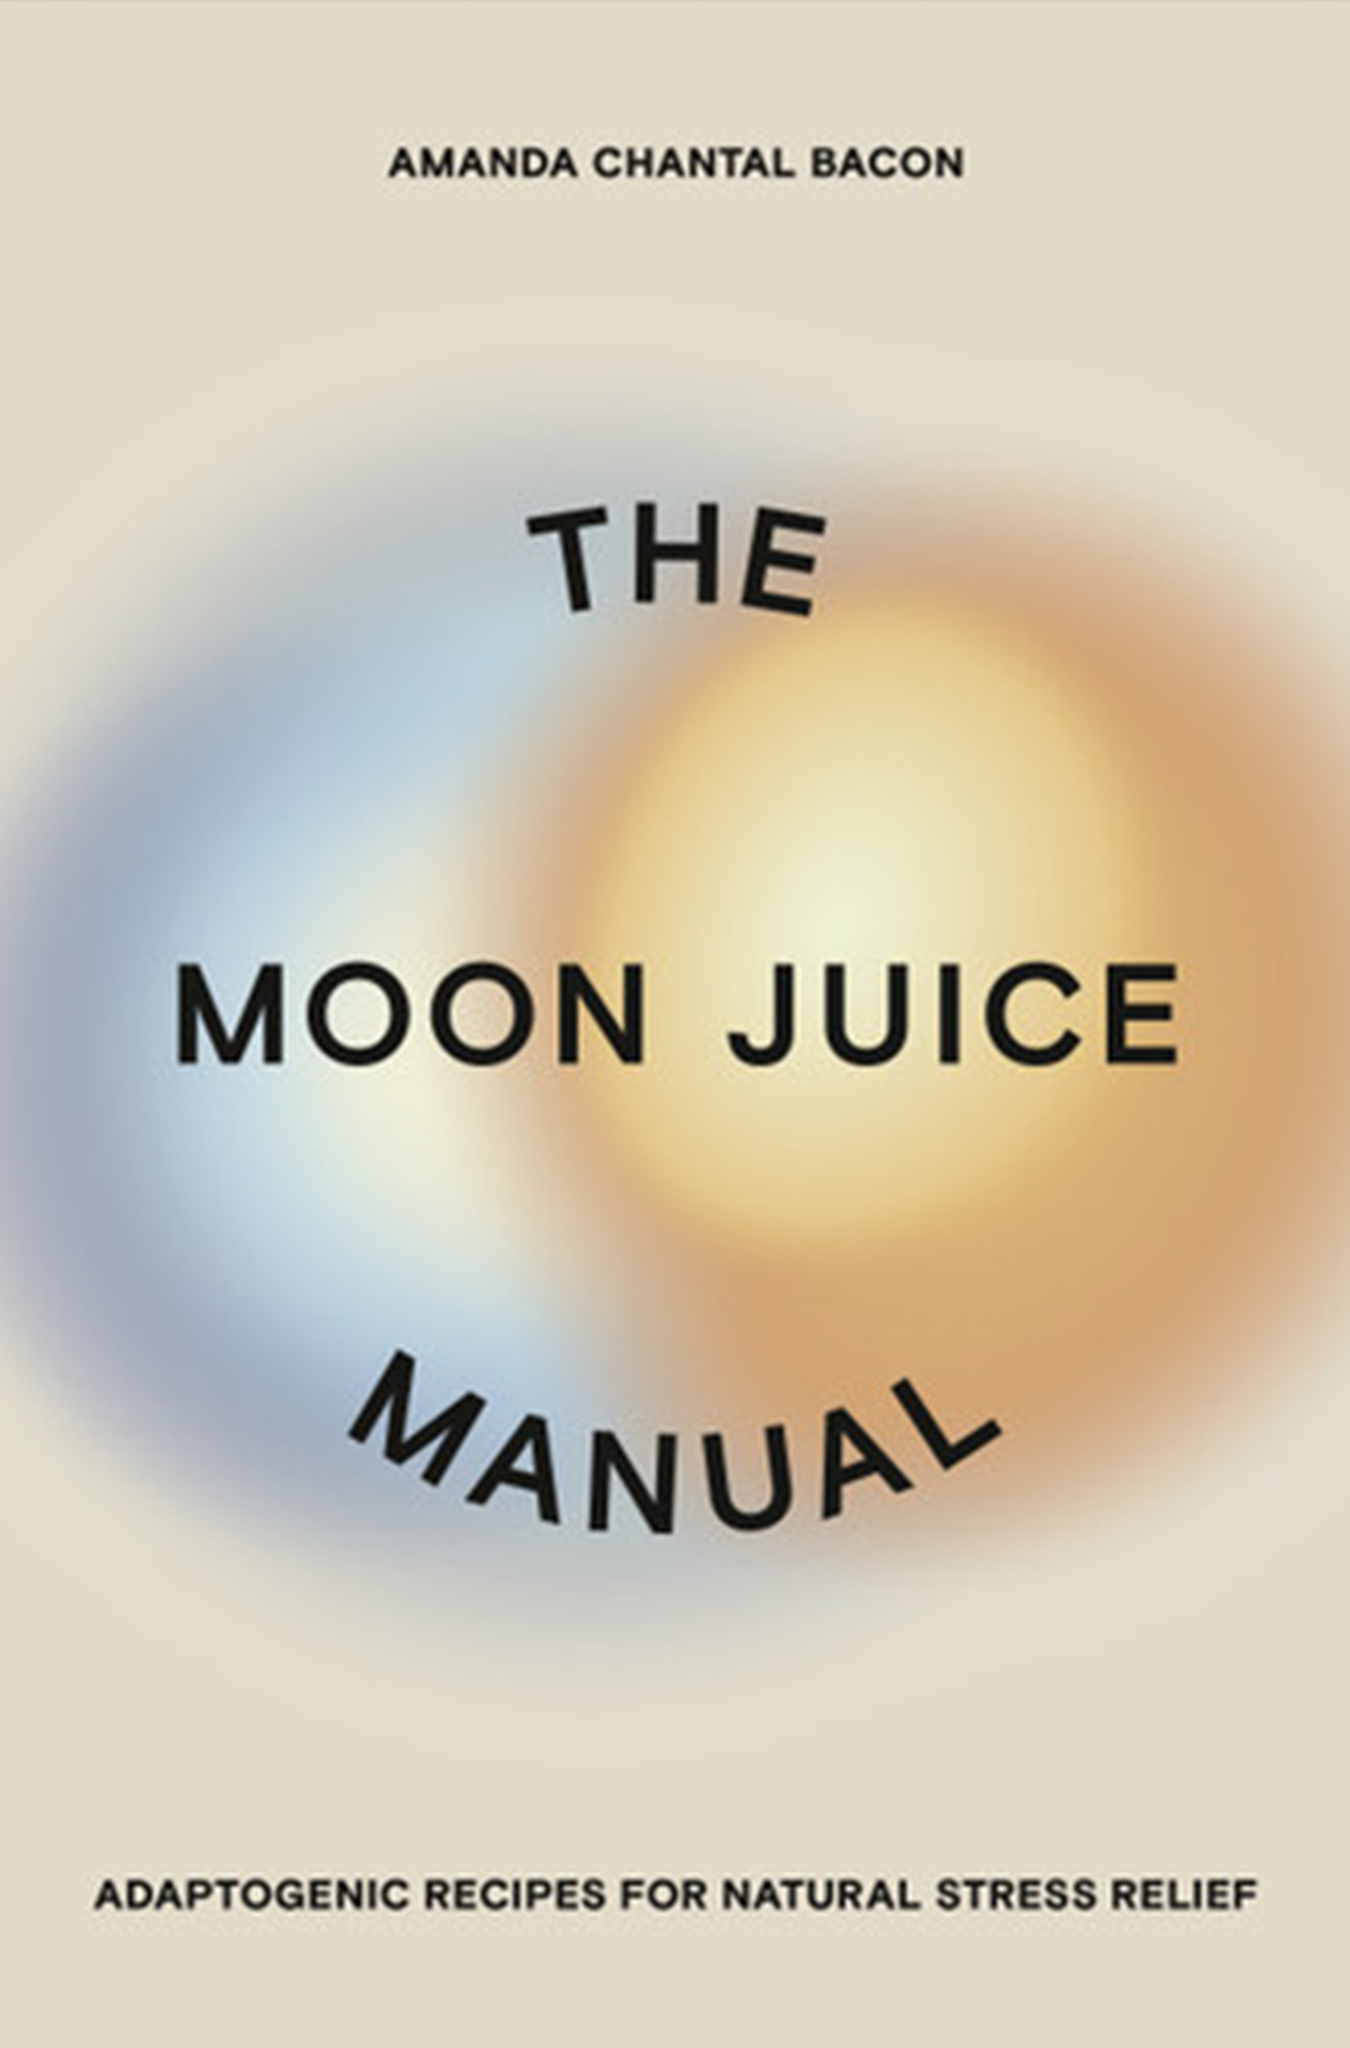 THE MOON JUICE MANUAL: ADAPTOGENIC RECIPES FOR NATURAL STRESS RELIEF